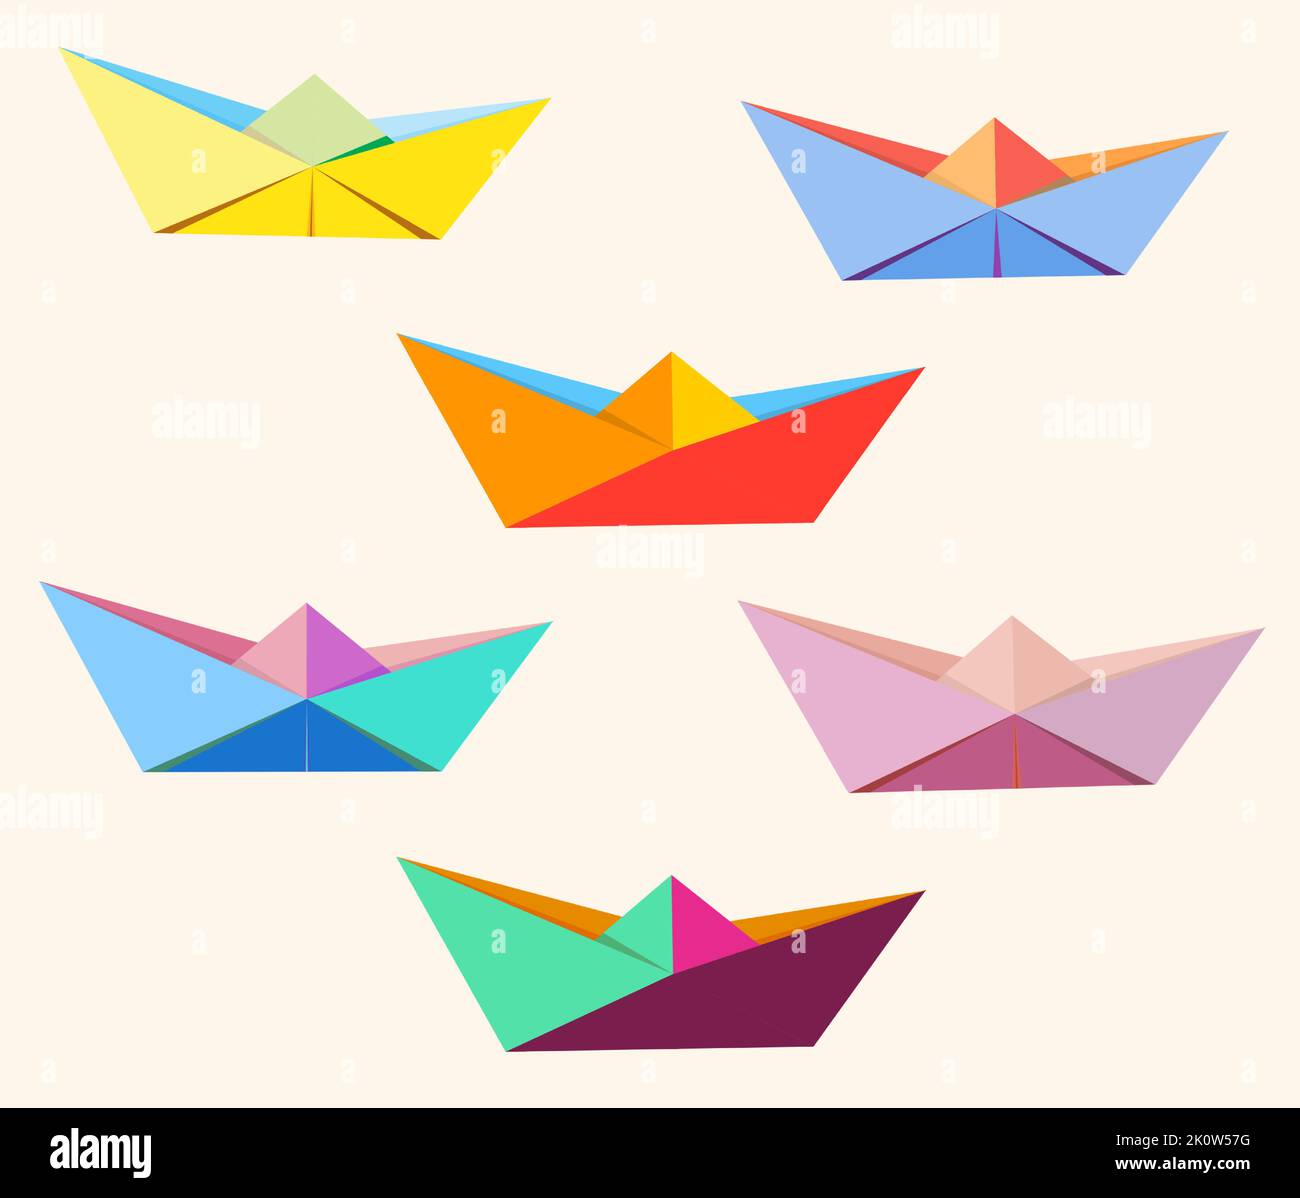 Origami Folded Paper Boat Set Of 6 Stock Vector